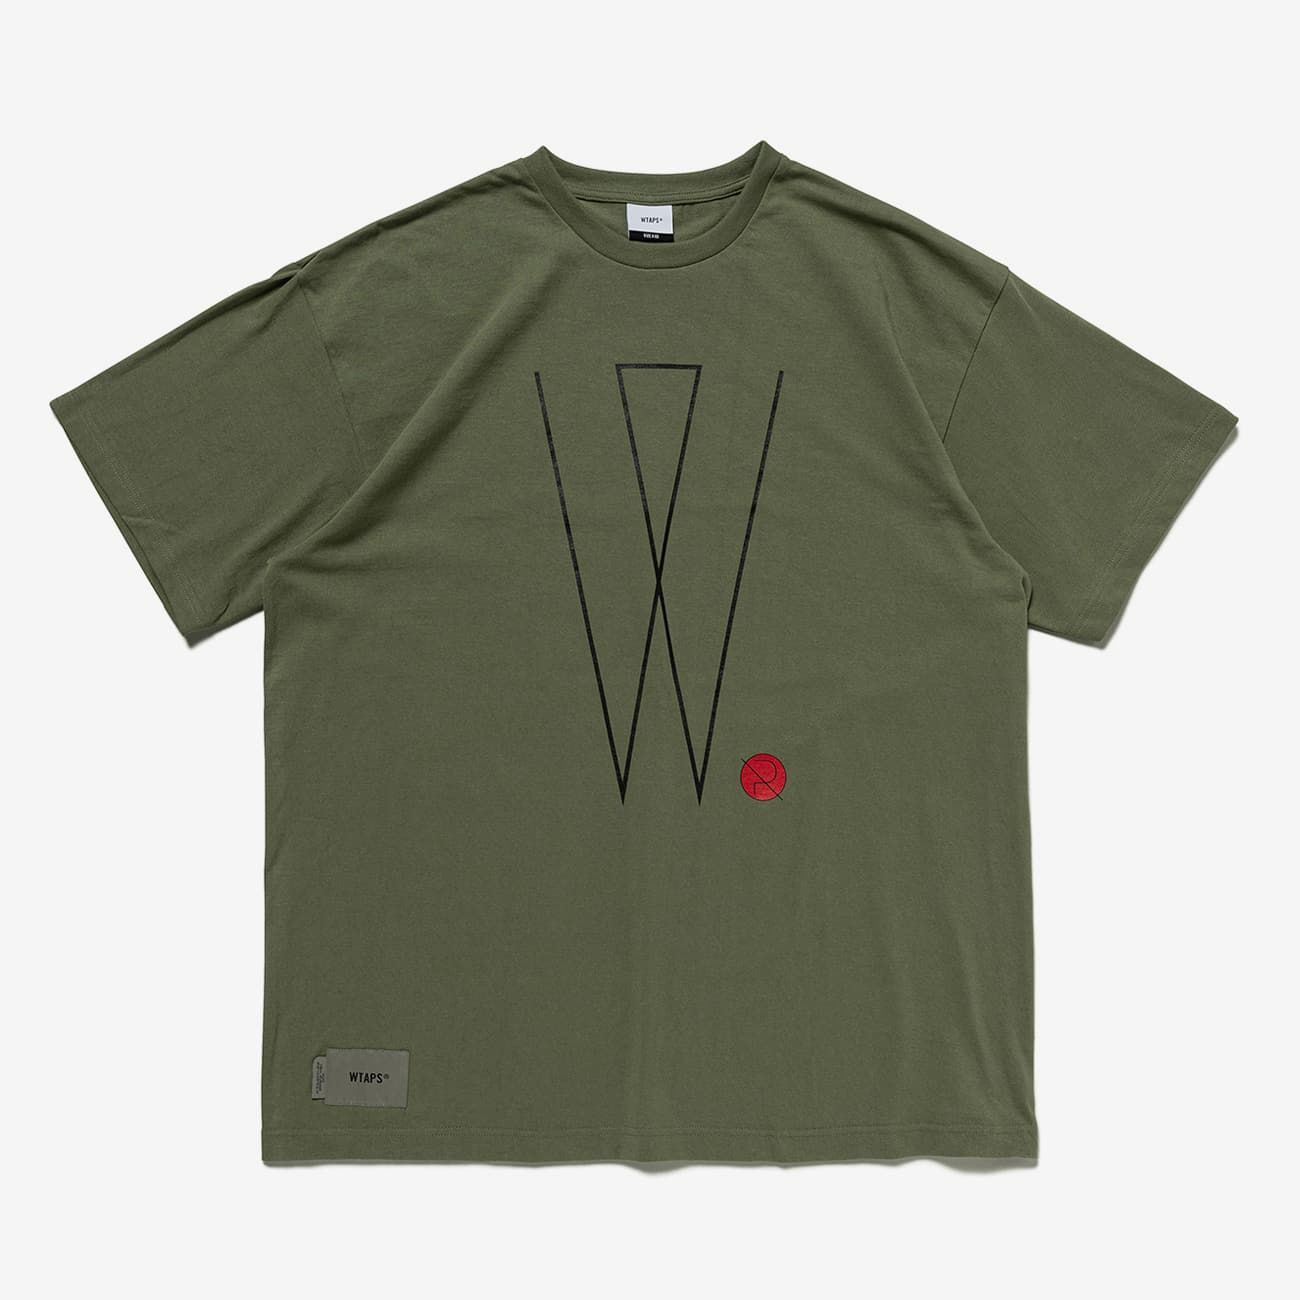 WTAPS【SNEAK COLLECTION】 VV / SS / COTTON 231ATDT-STM01S - メルカリ